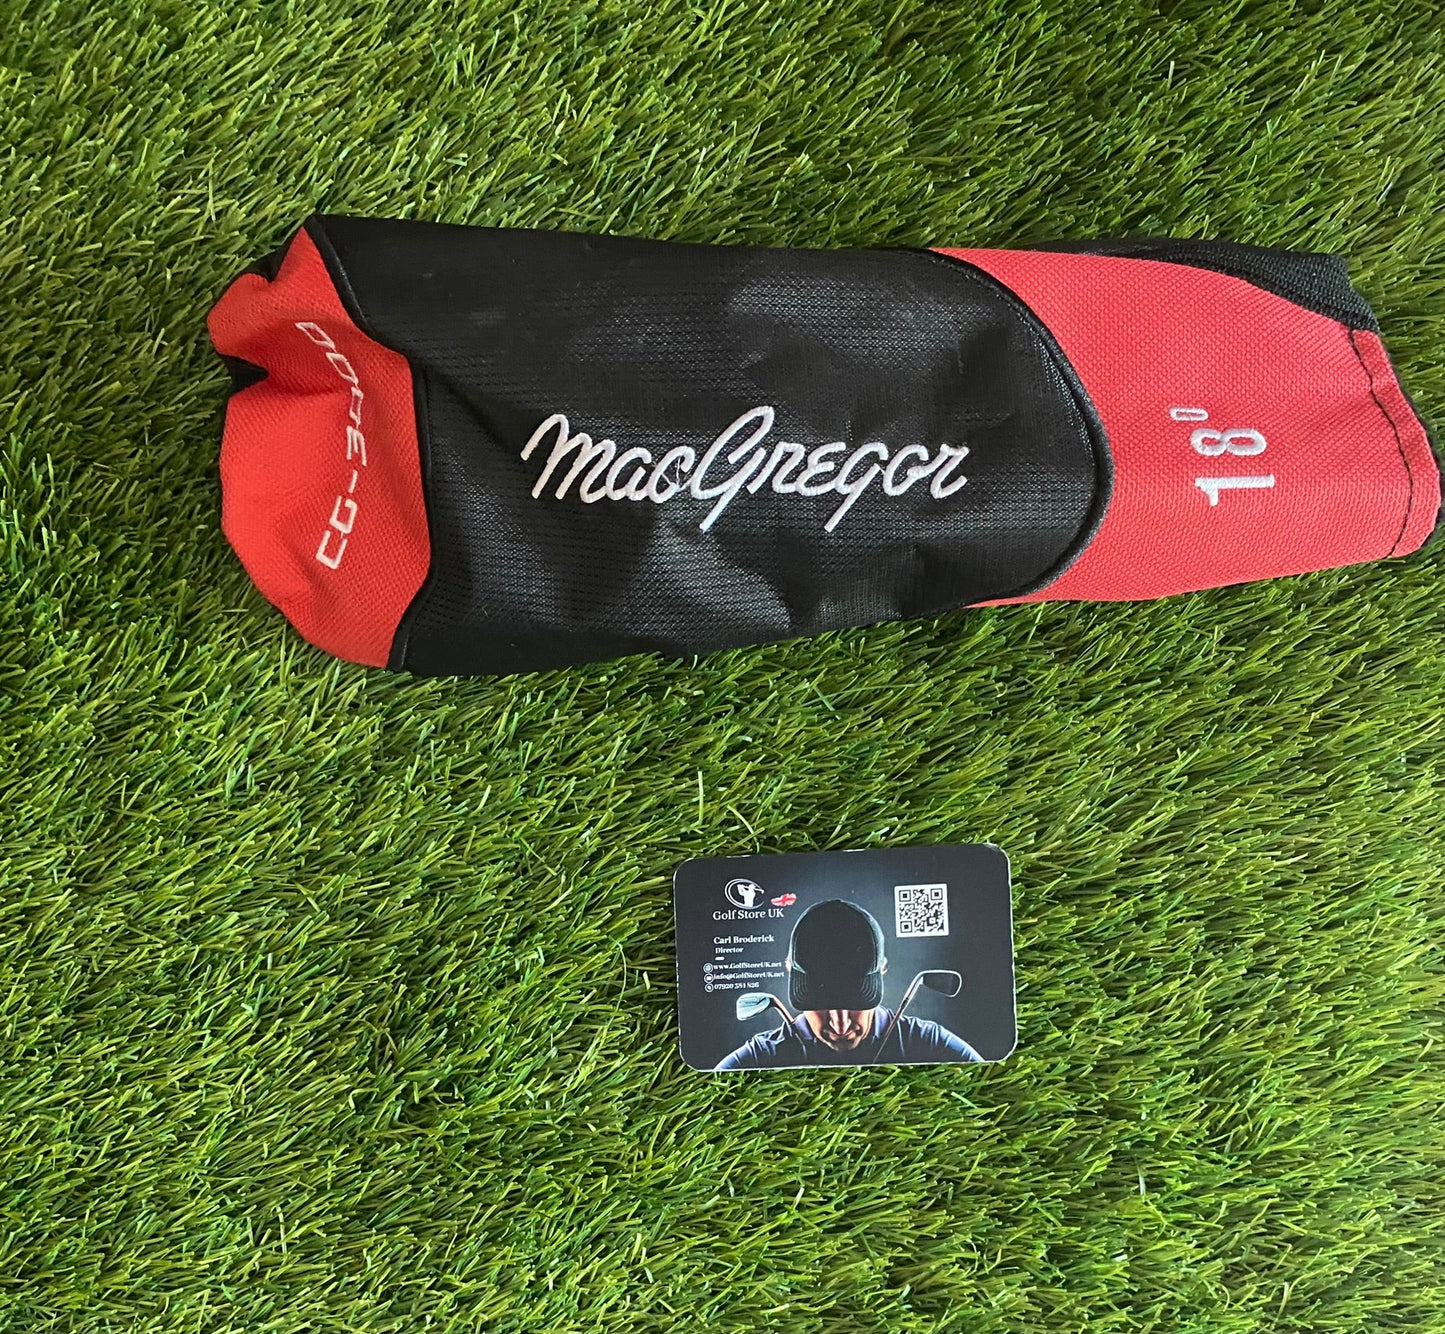 MacGregor 18 Degree Wood, Headcover included, Stunning Wood - Golf Store UK